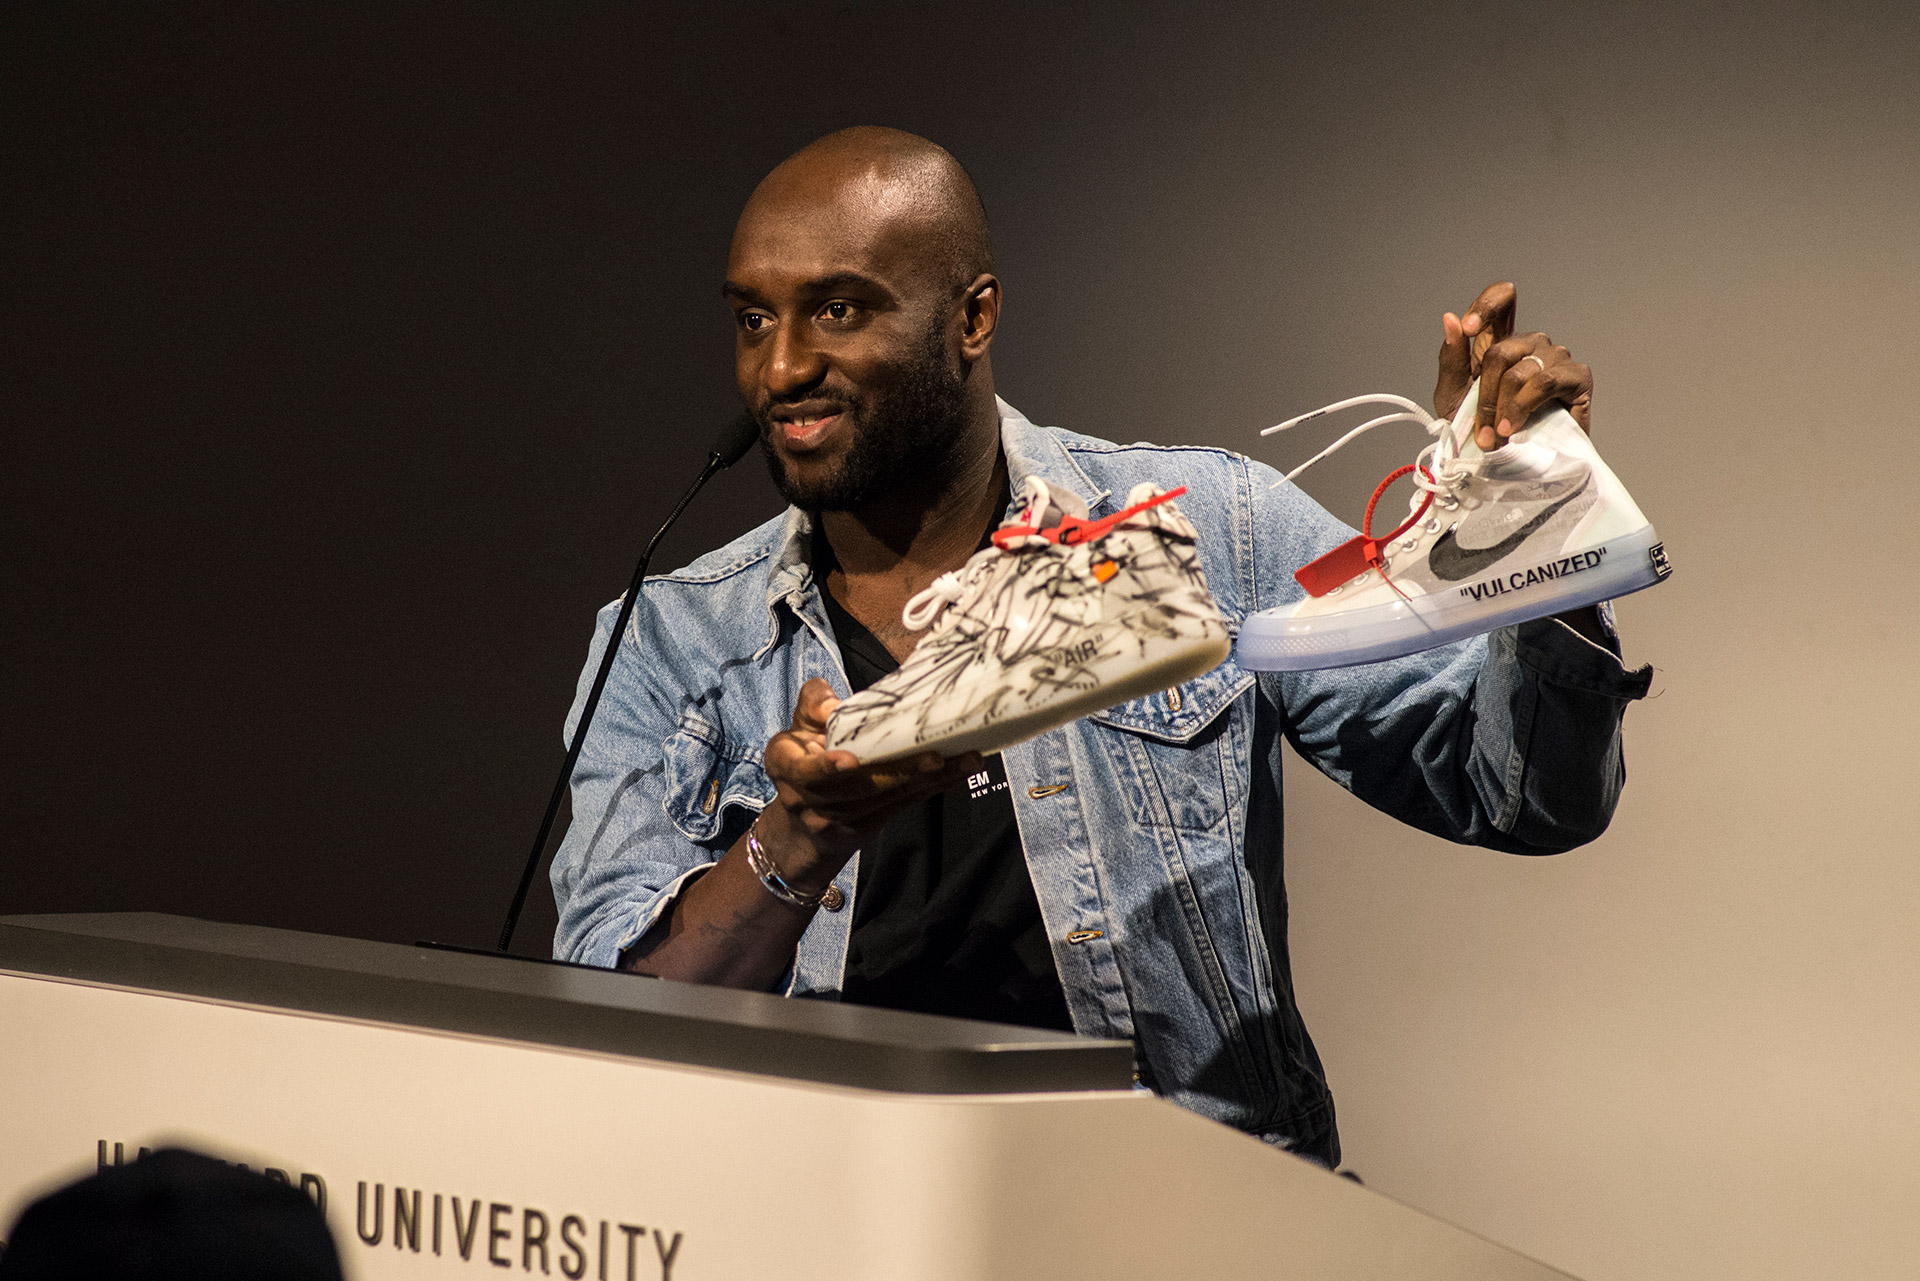 Virgil Abloh holds up two pairs of sneakers at the GSD lecture podium